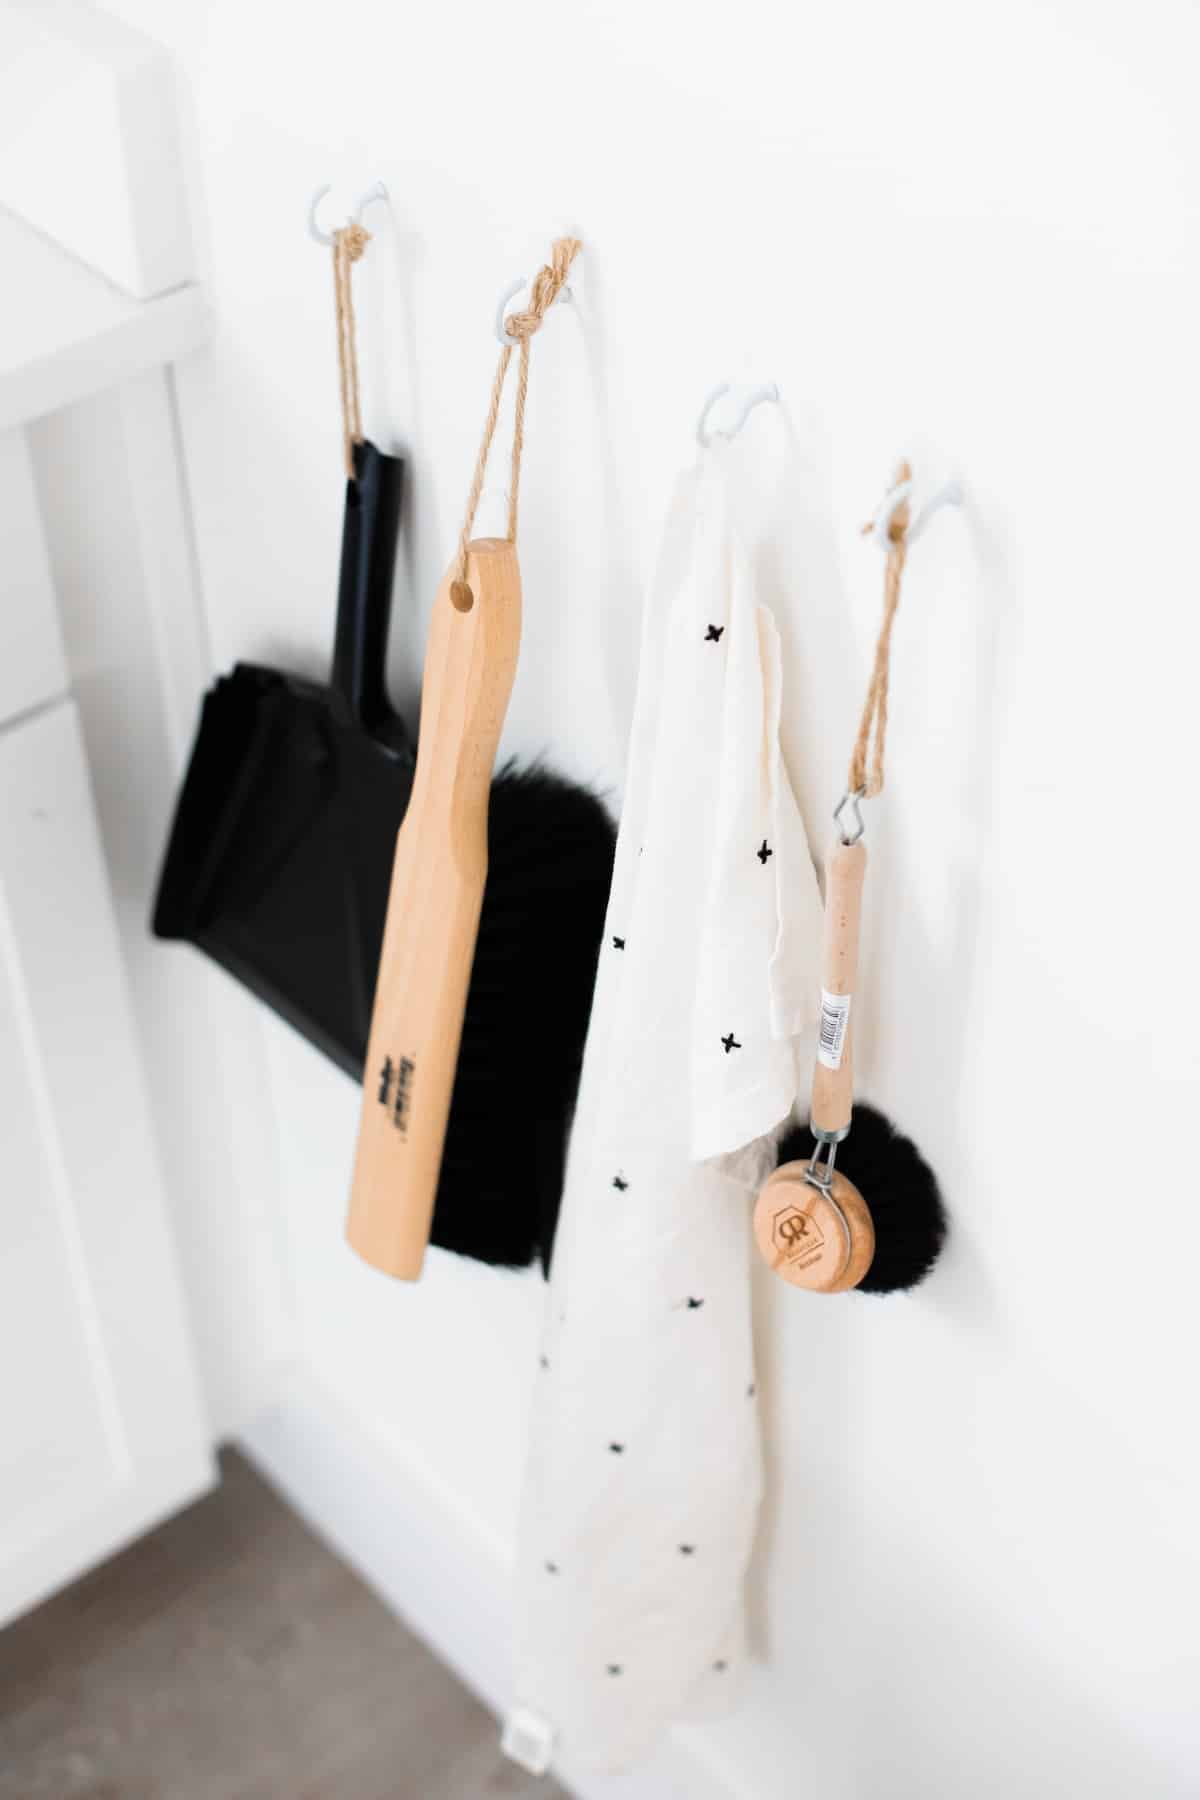 Minimalist housekeeping tools hung neatly on a white wall.